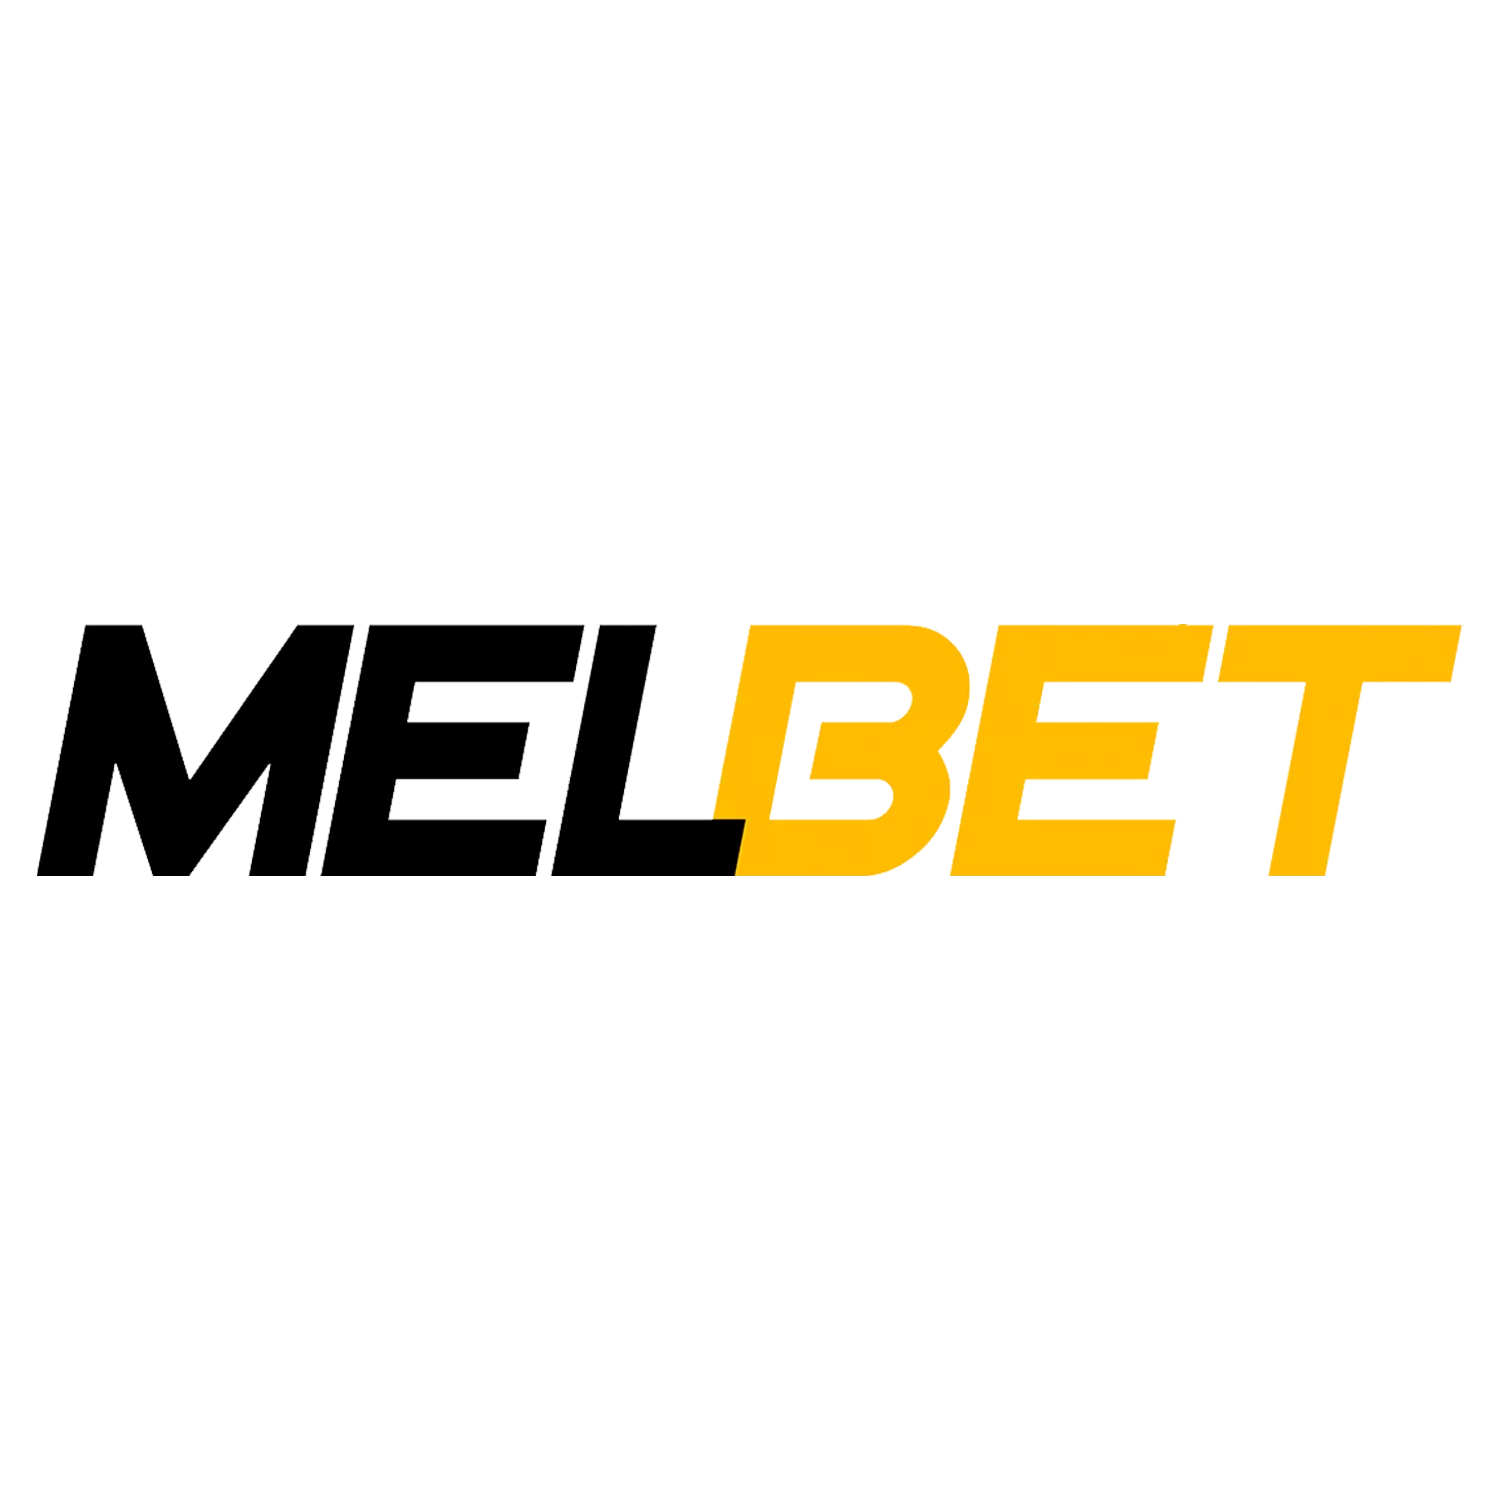 Melbet is great kabaddi betting sportbook with the best reputation.